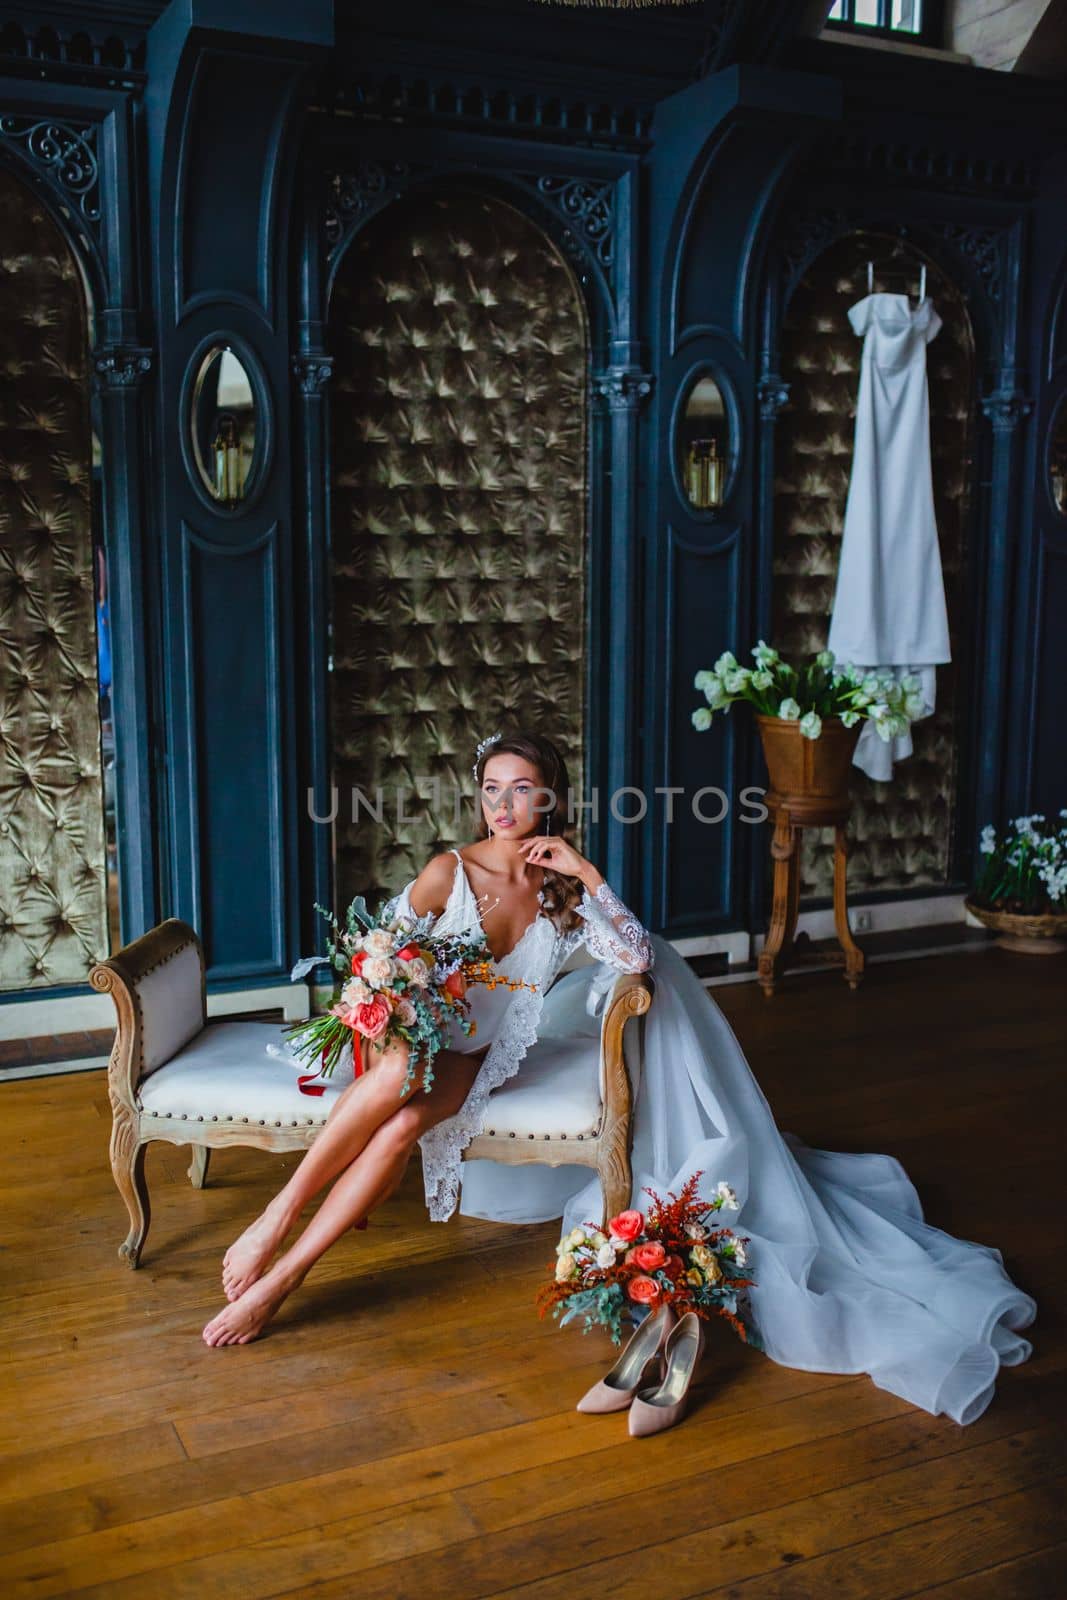 Seductive young bride with beautiful naked legs in white negligee and lingerie posing with gorgeous bridal bouquet on a sofa